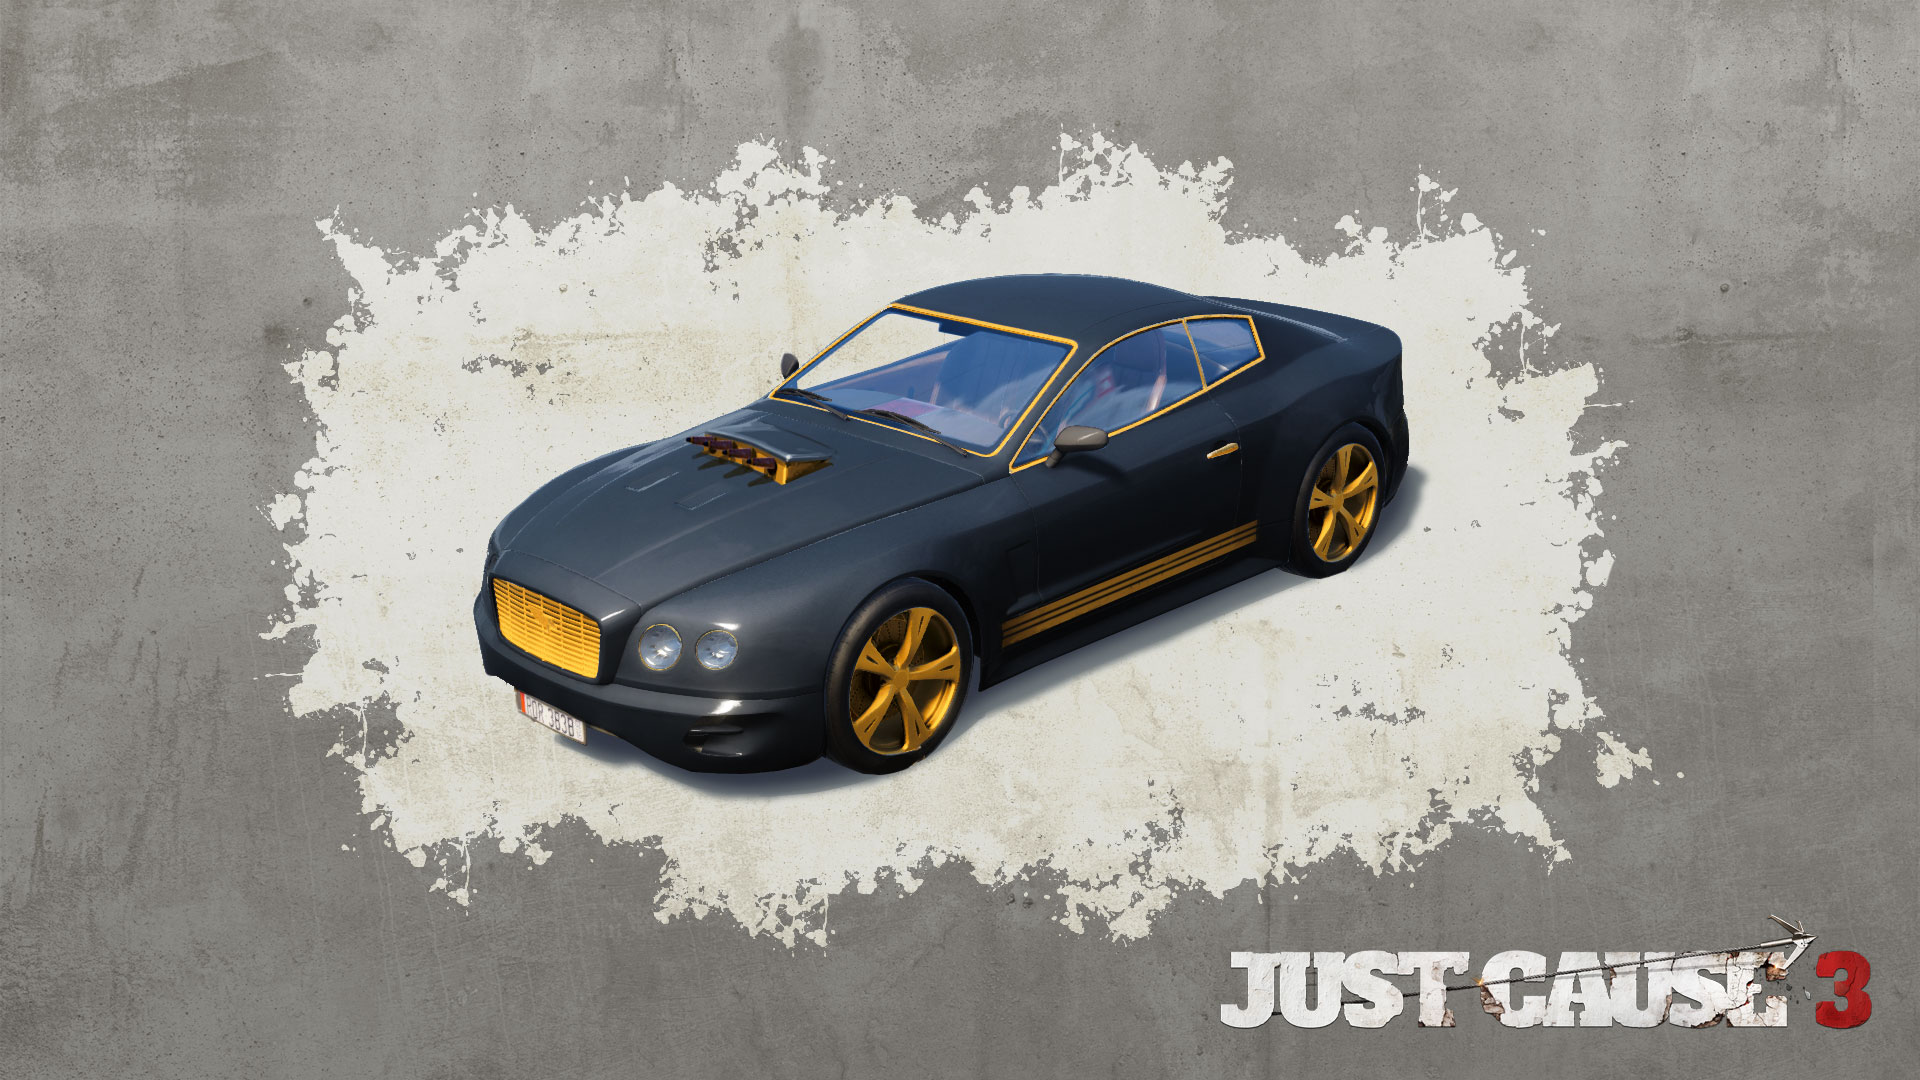 Just Cause™ 3 - Rocket Launcher Sports Car on Steam